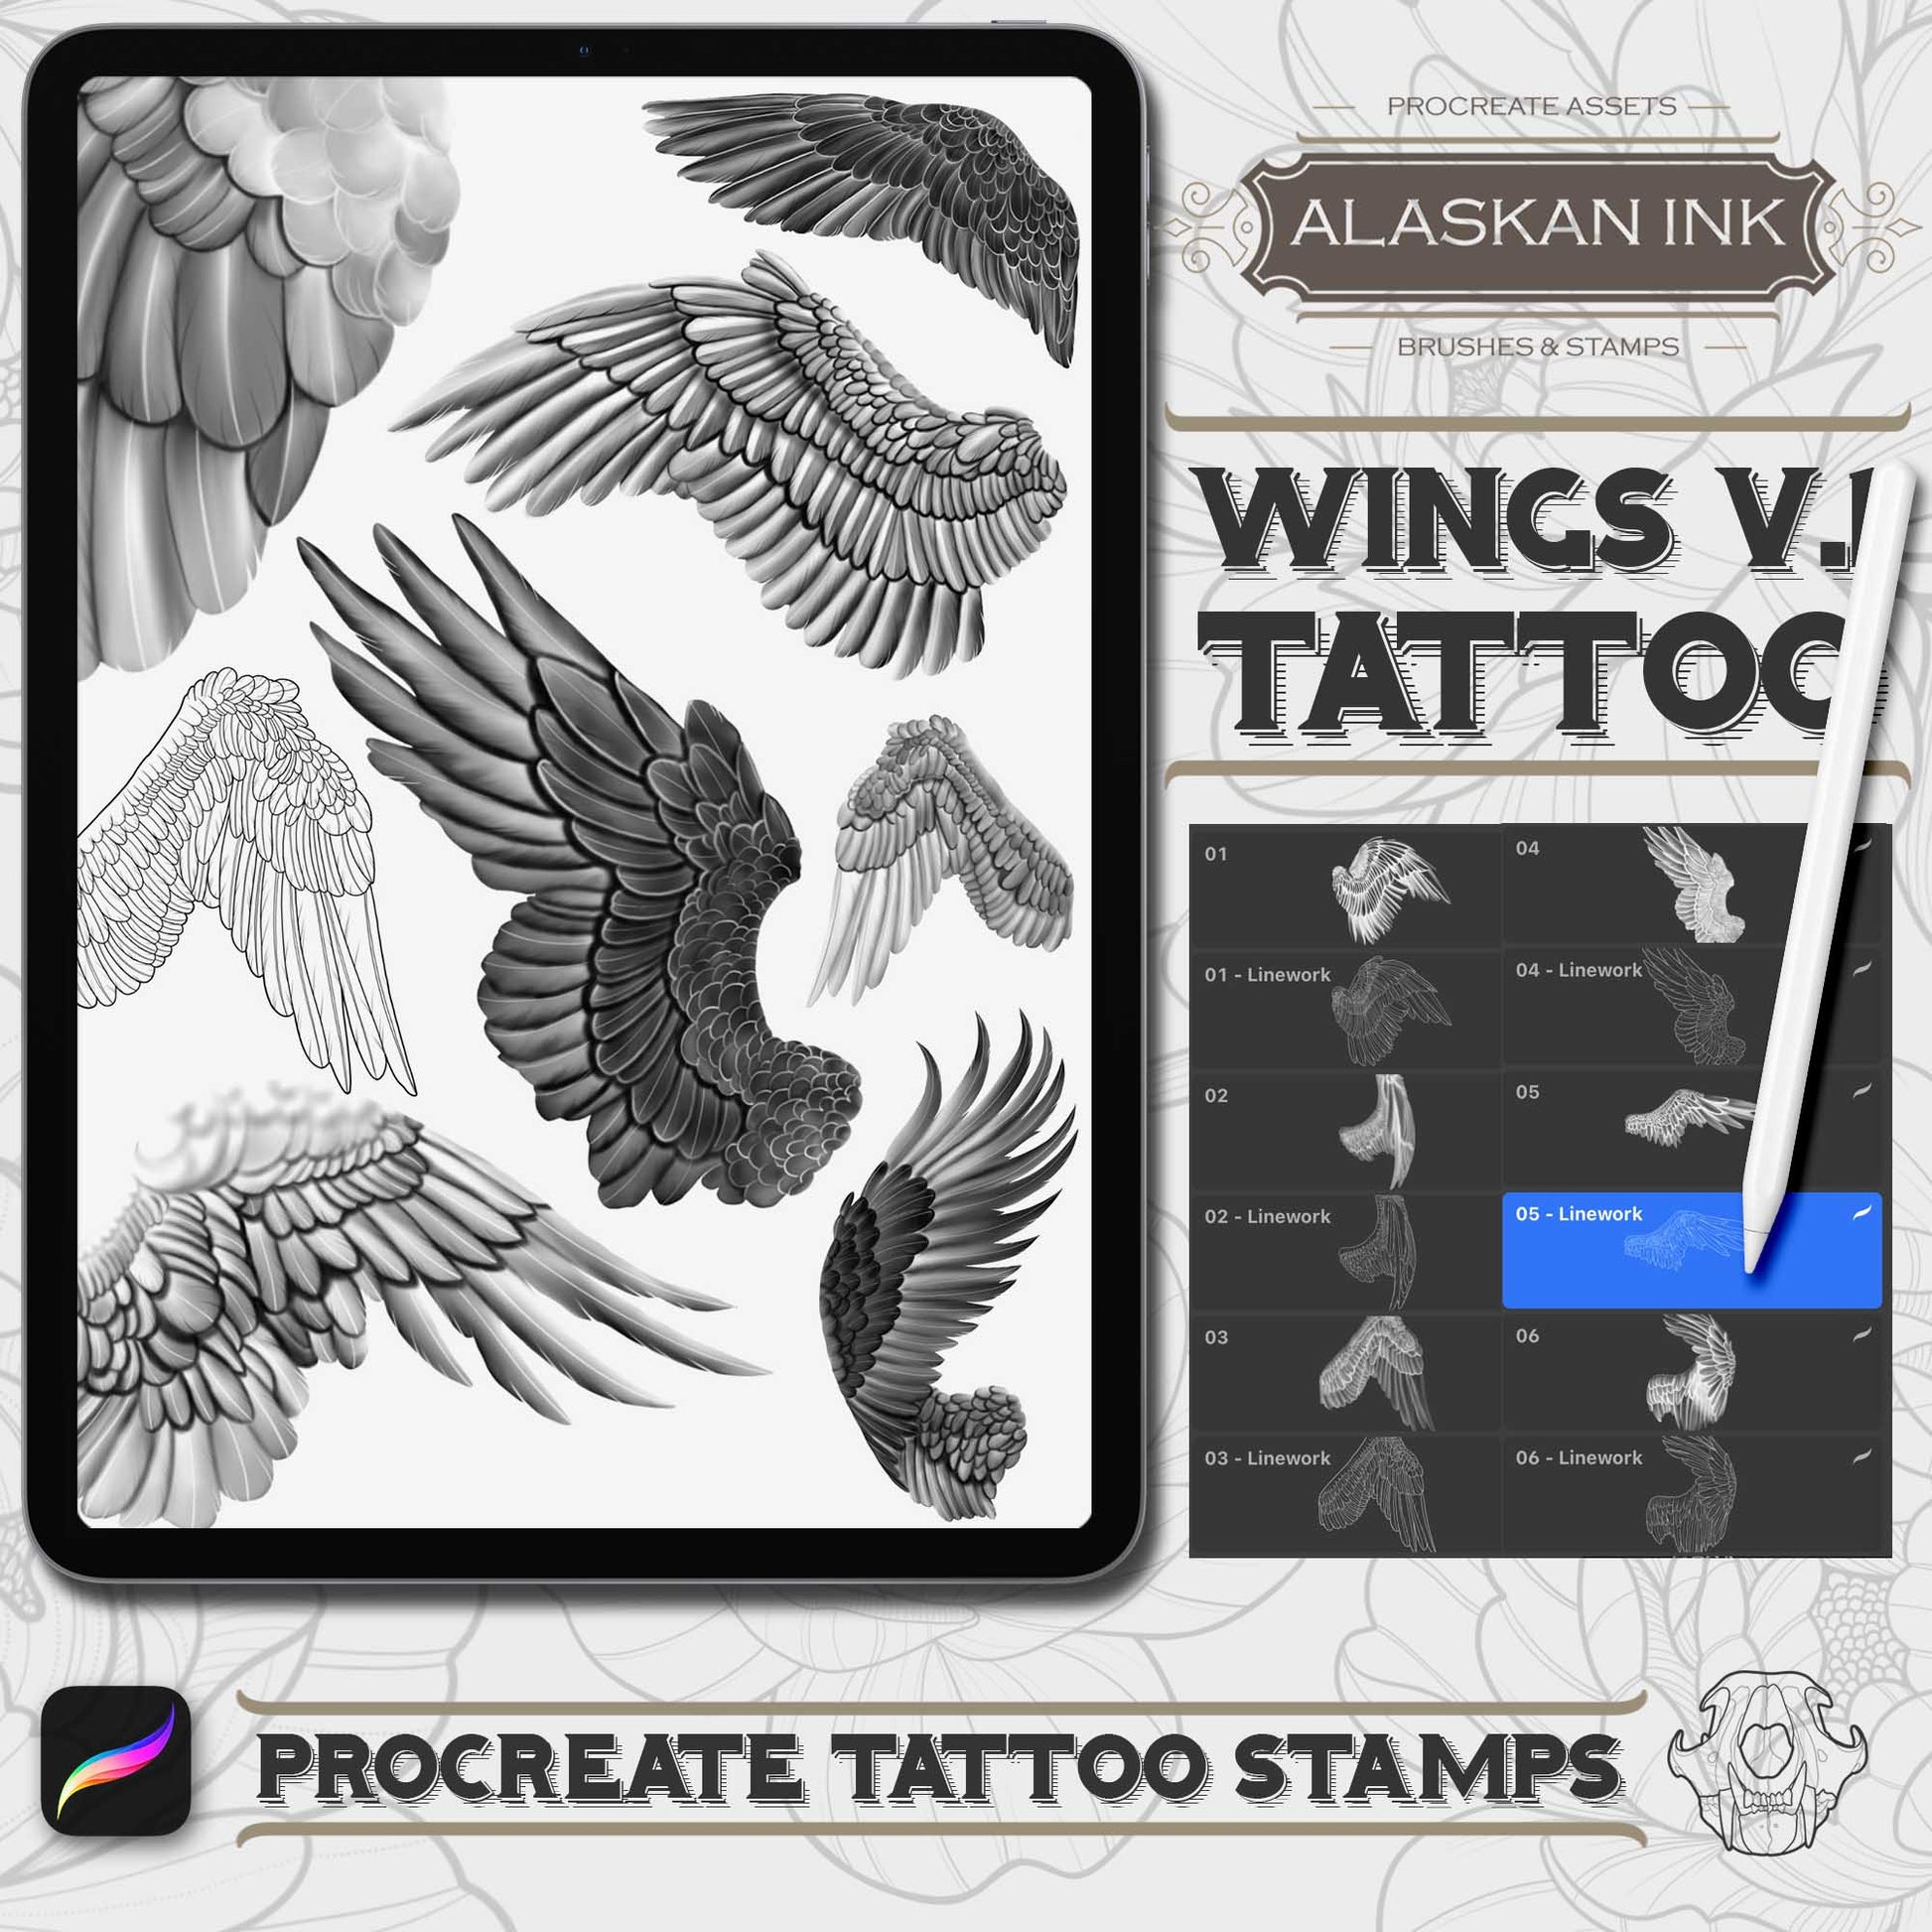 35 Wings Tattoo Brushes for Procreate application on iPad pro and iPad 